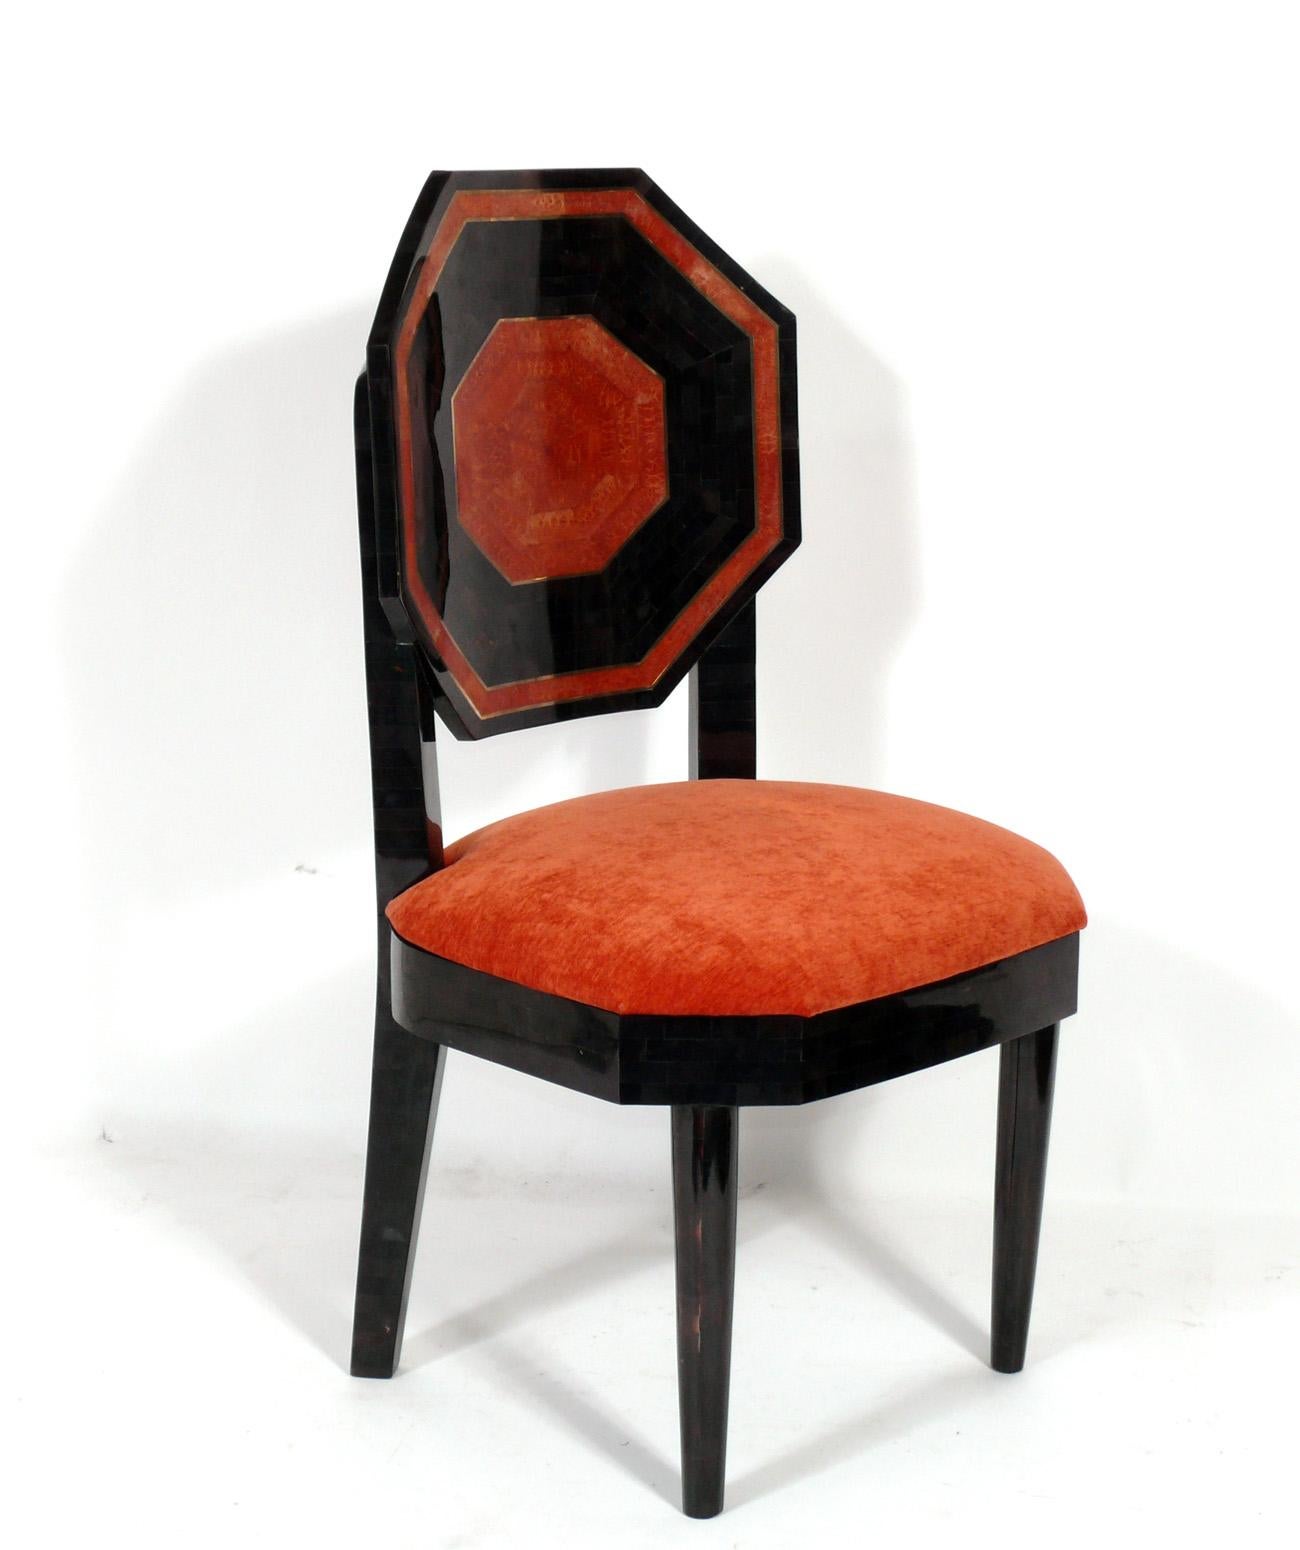 Tessellated Marble Dining Chairs, American, circa 1970s. Outstanding color combination with the black and deep coral orange color tessellated marble with inset brass inlay. Newly reupholstered in a plush velvety fabric.